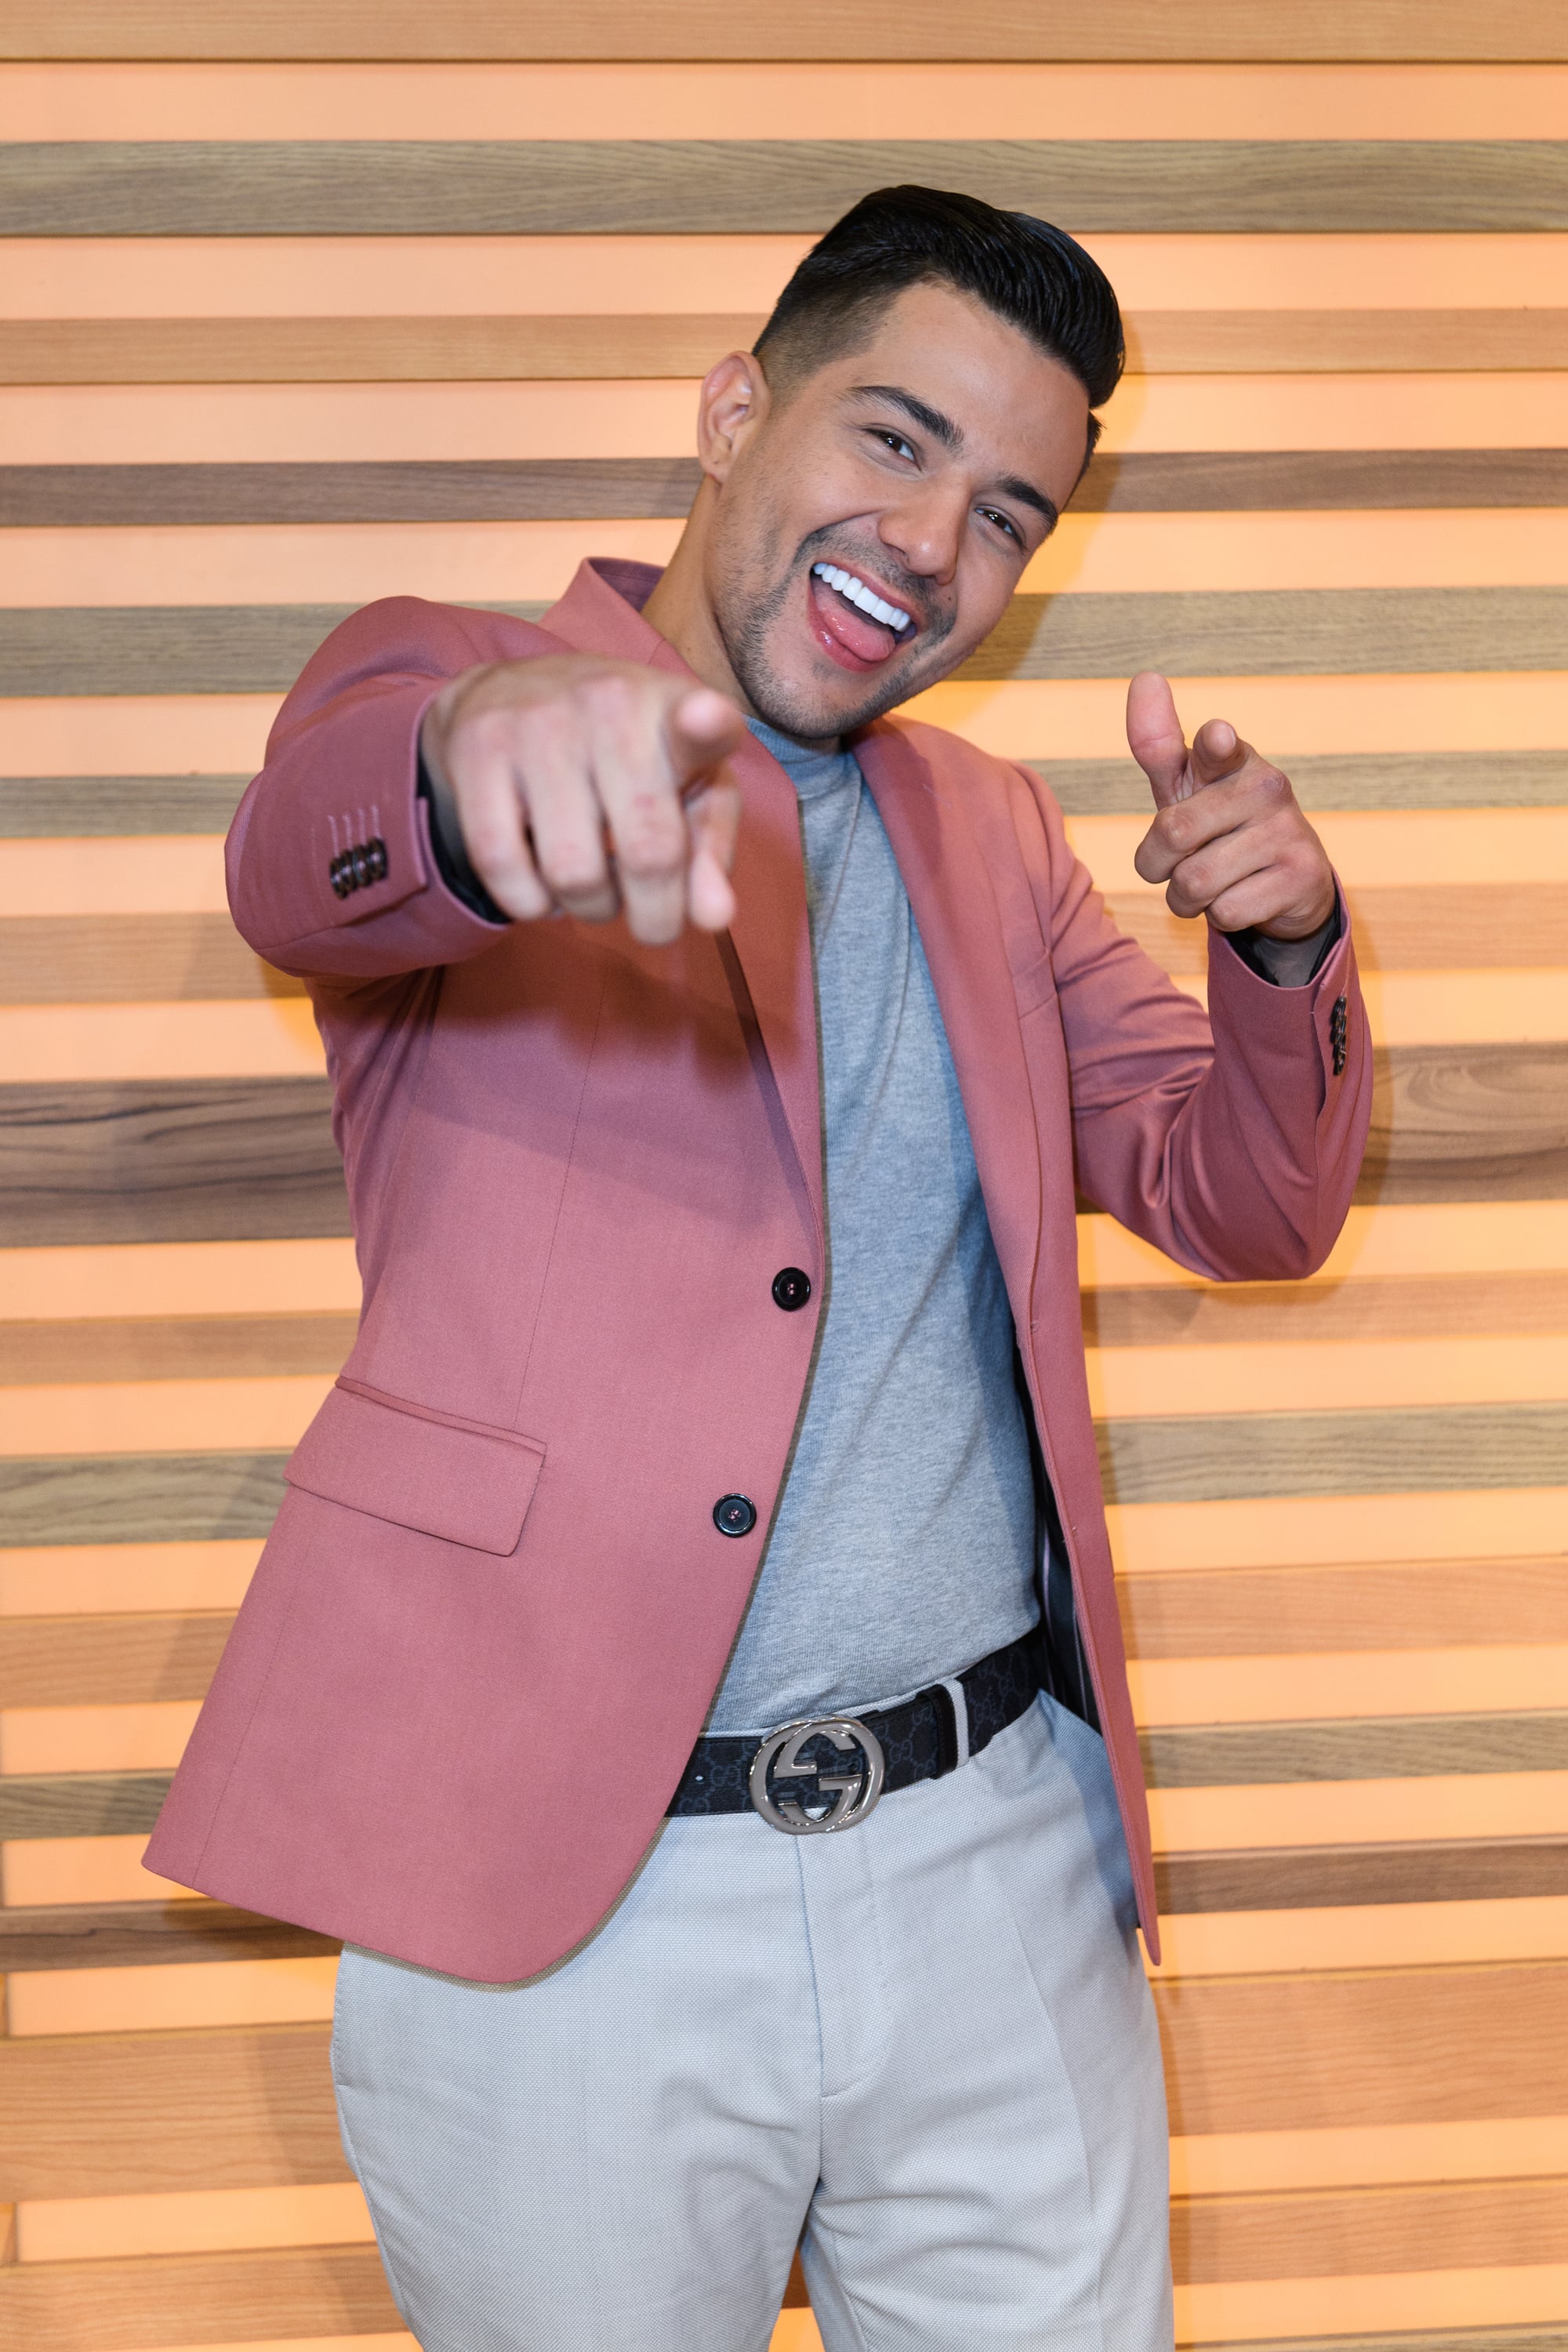 MIAMI, FL - MAY 16:  Luis Coronel is seen on the set of 